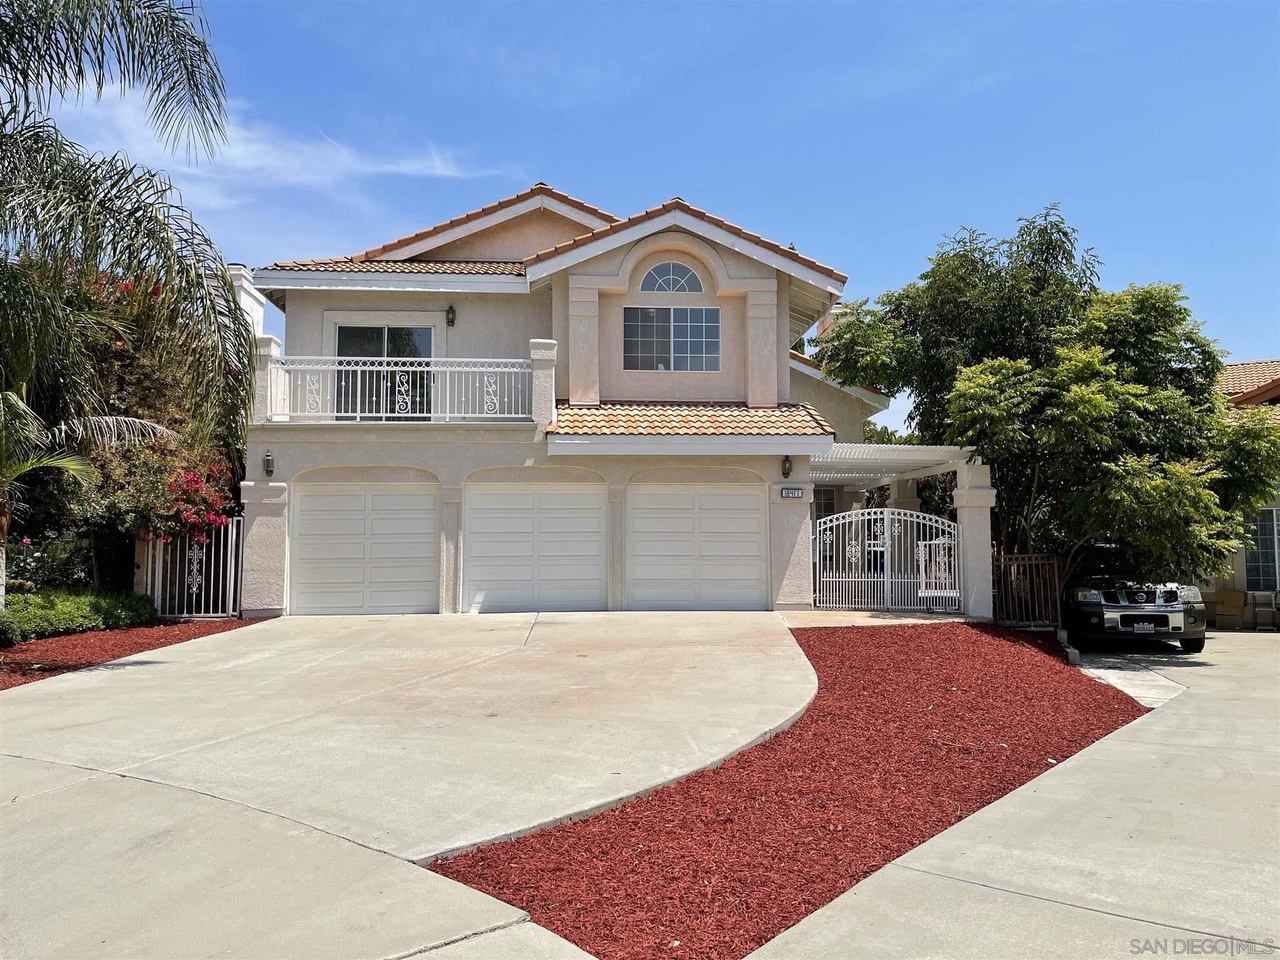 Single family house sold at Rowland Heights, CA 91748 - representing seller